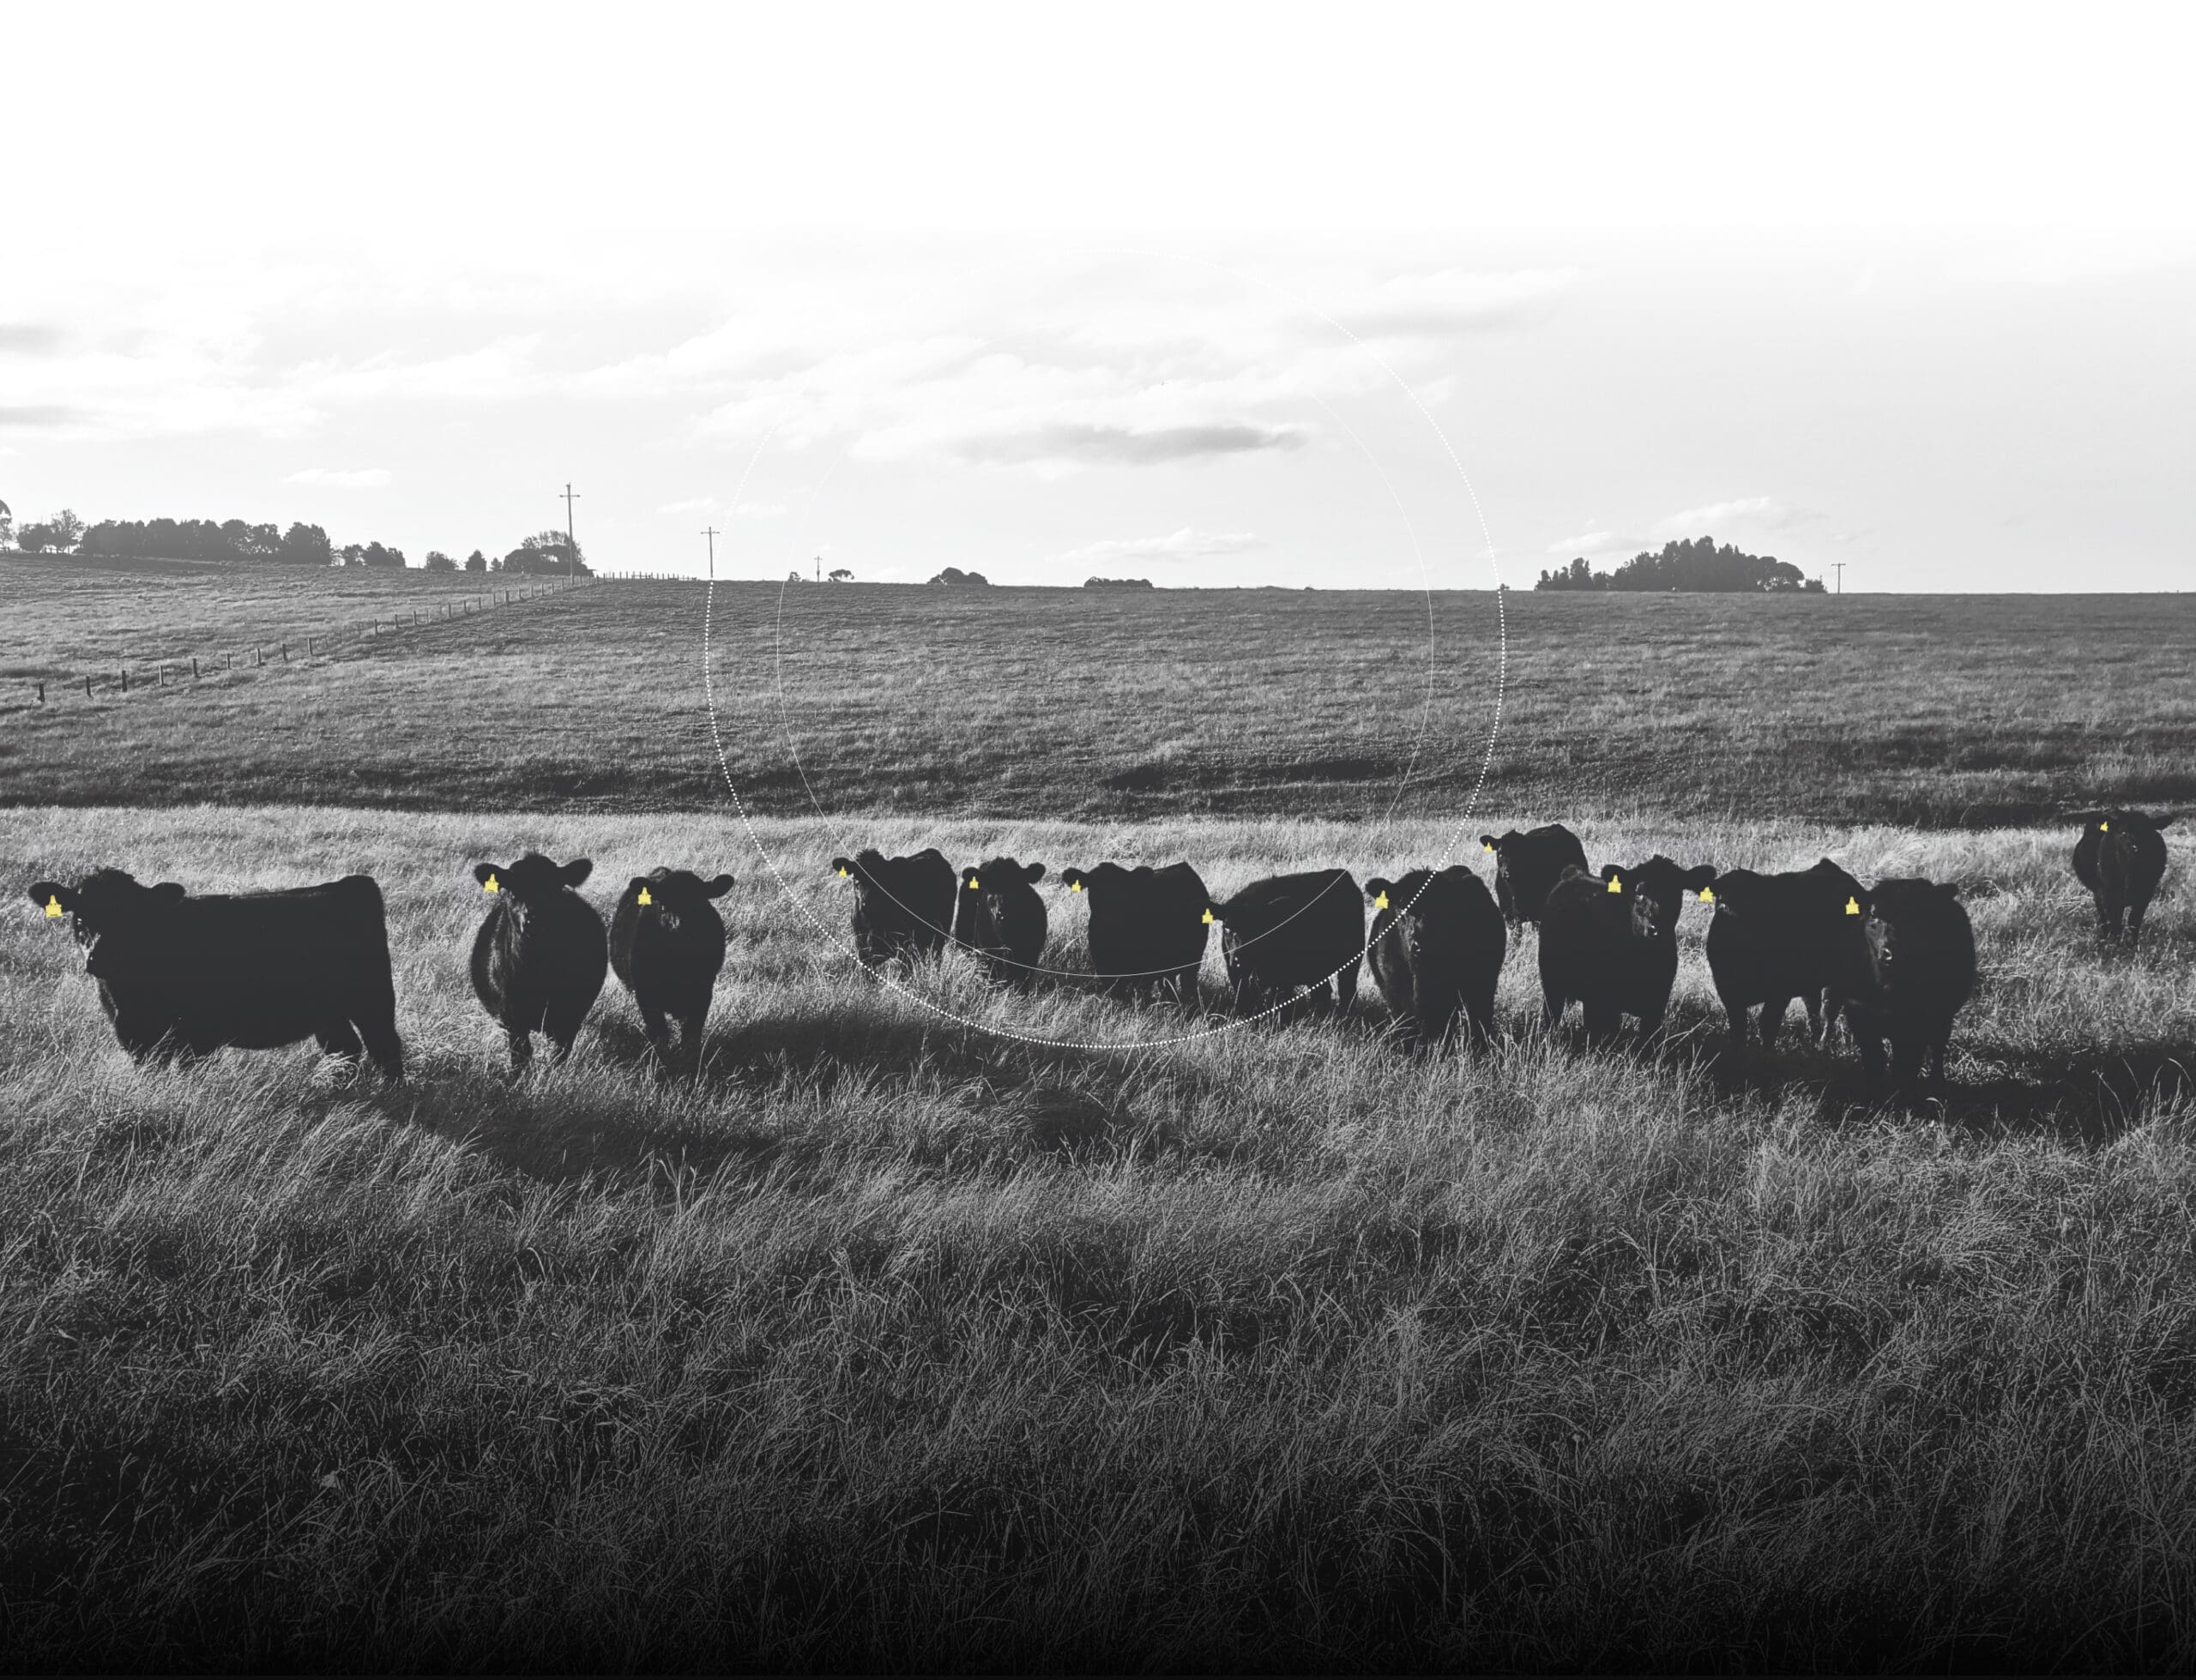 Cattle in ranch field with RFID tags